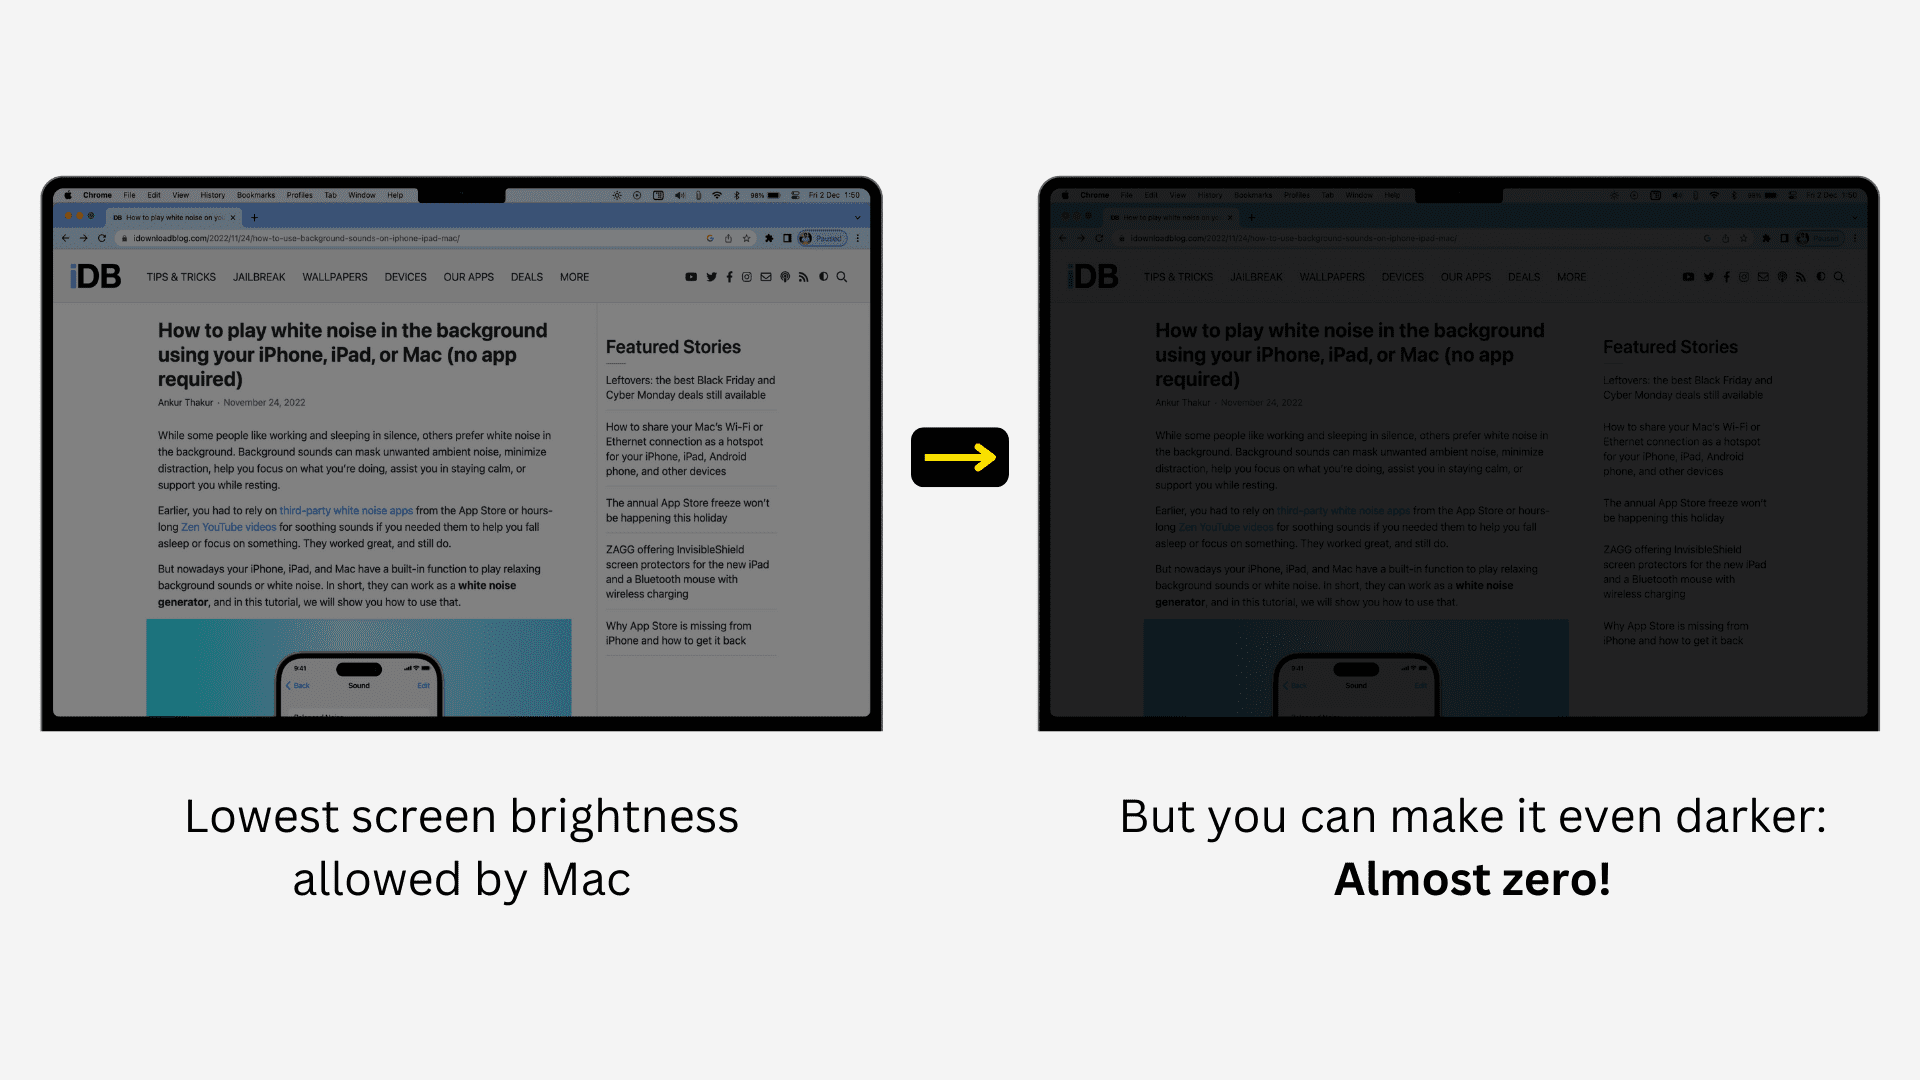 how to turn the brightness down on a mac